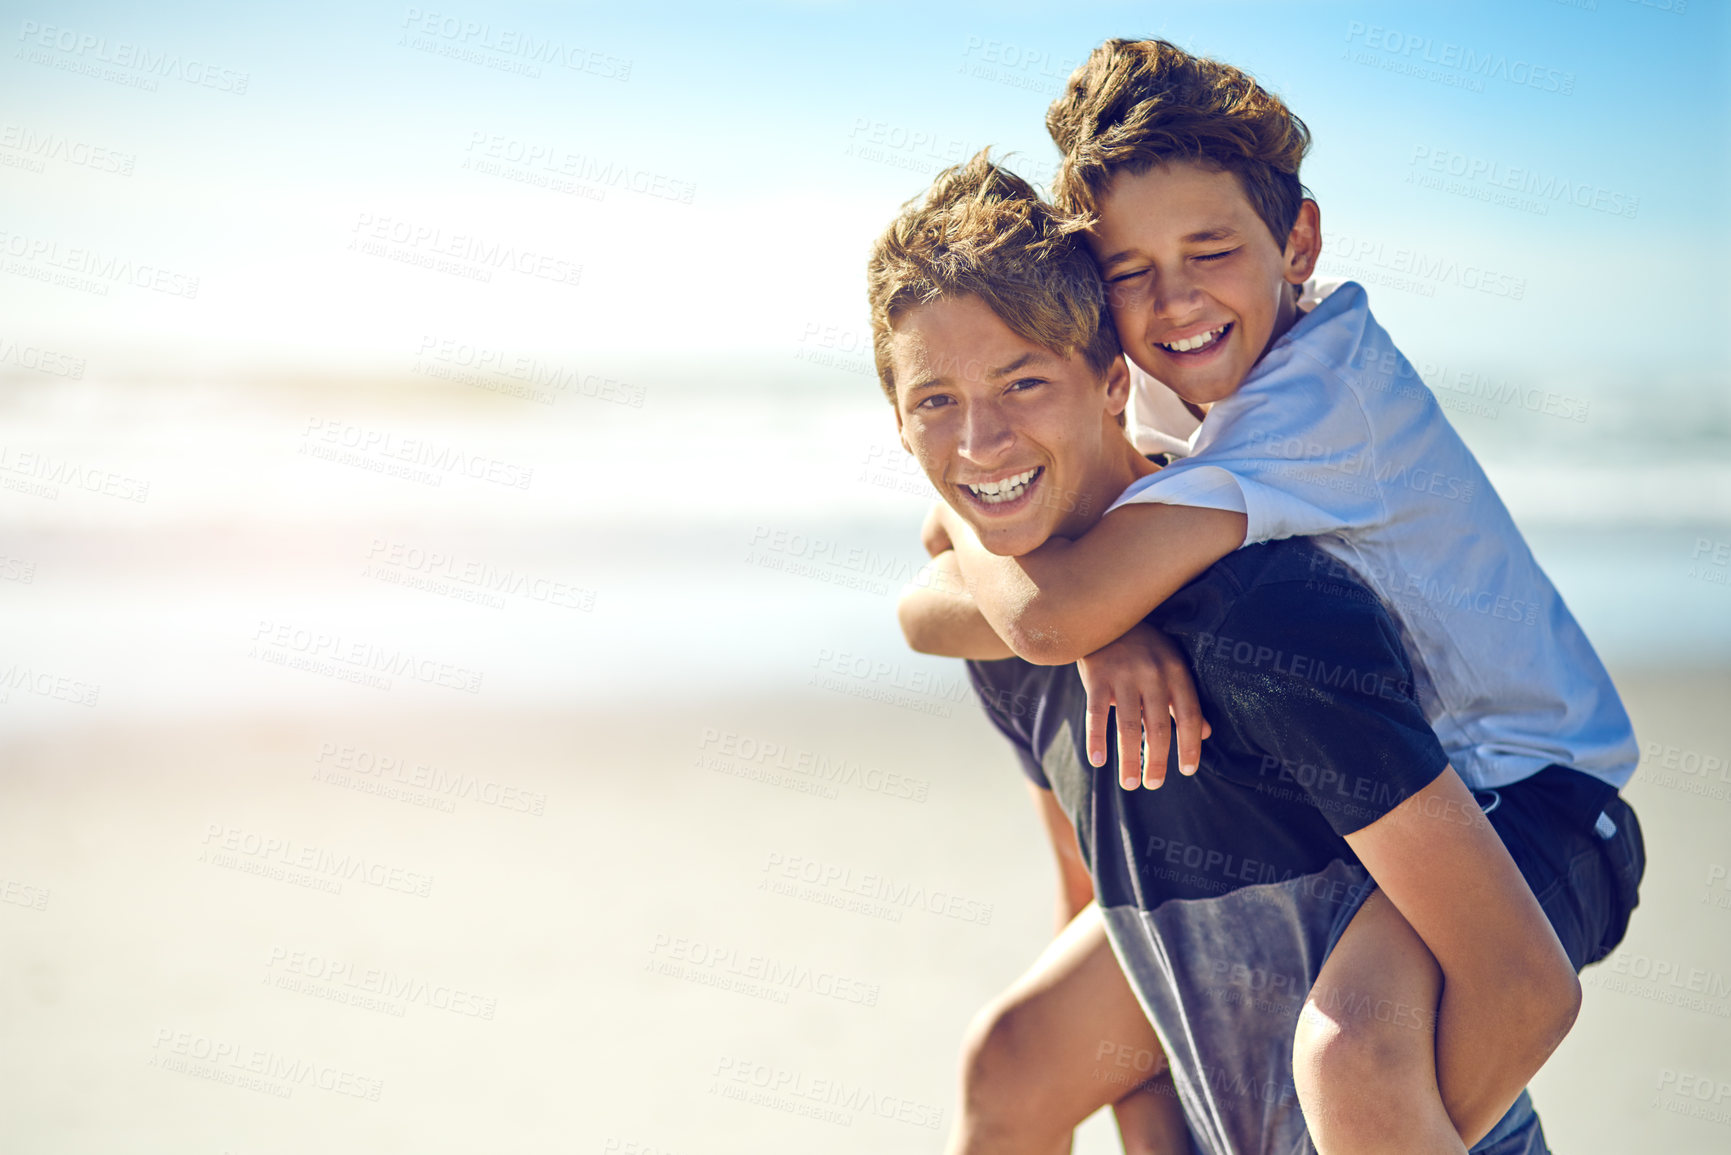 Buy stock photo Portrait of a happy young boy giving his little brother a piggyback ride on the beach